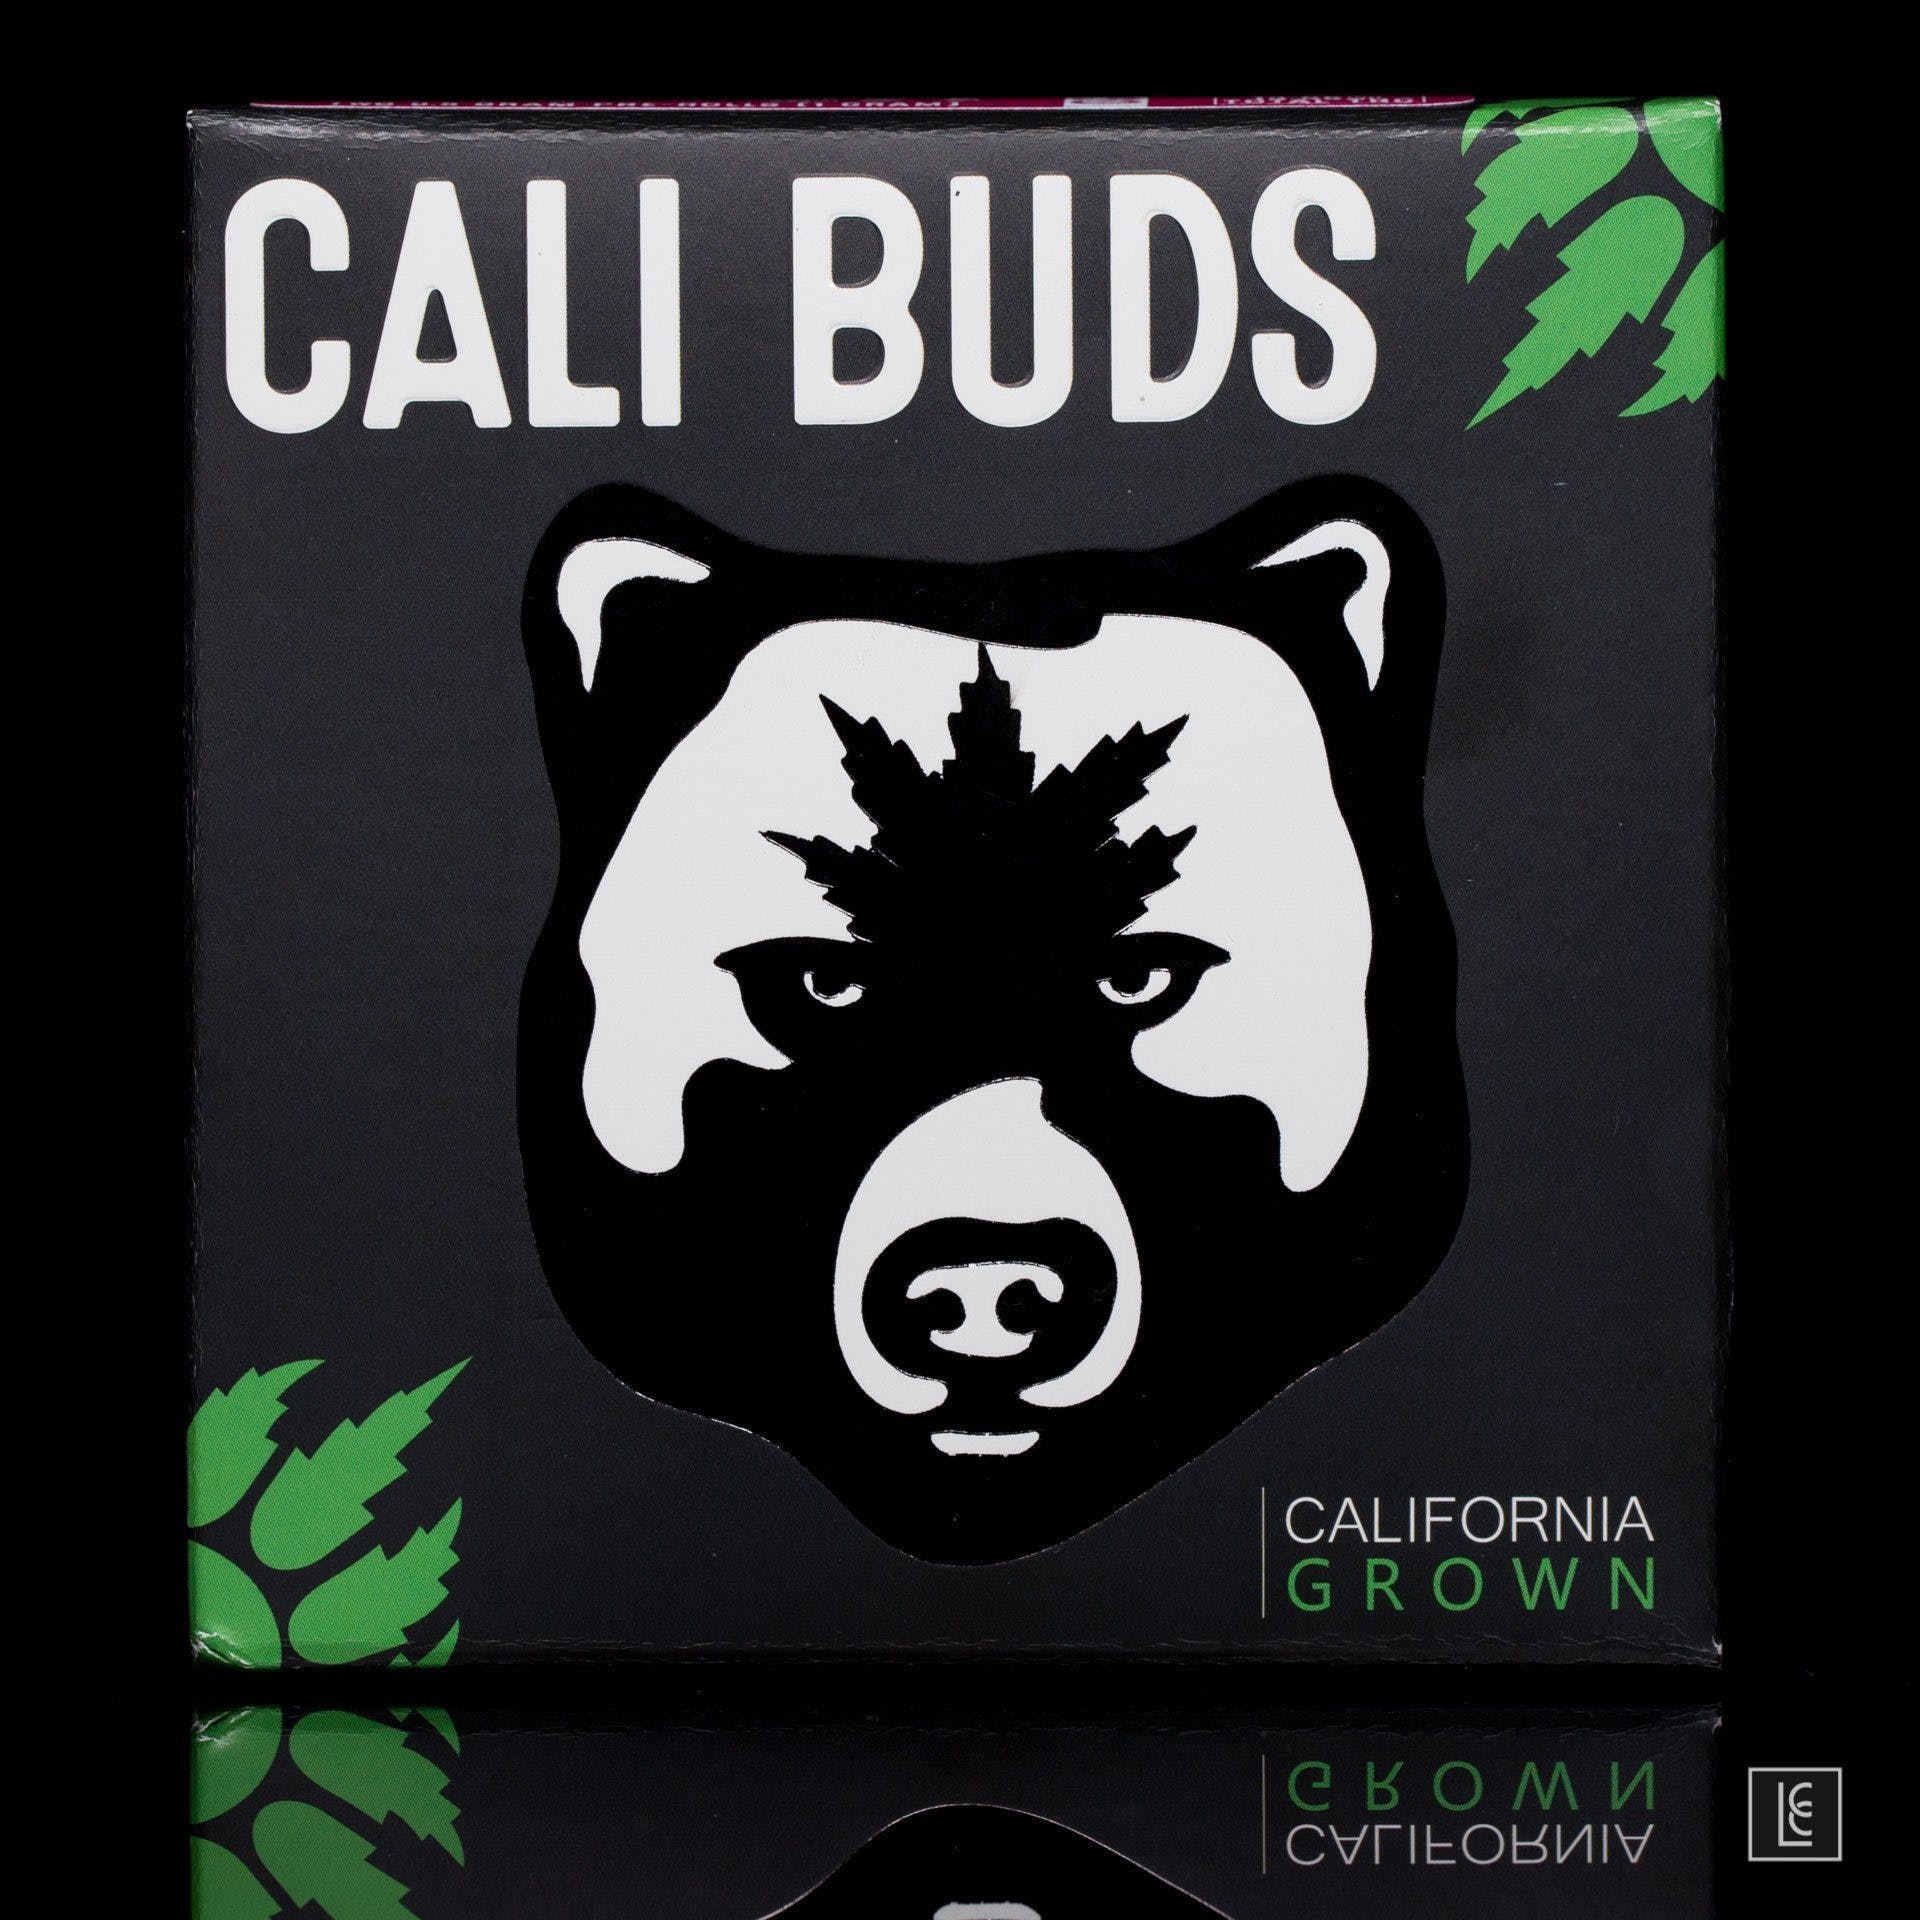 marijuana-dispensaries-2435-military-ave-los-angeles-cali-buds-extreme-creme-2-pack-pre-roll